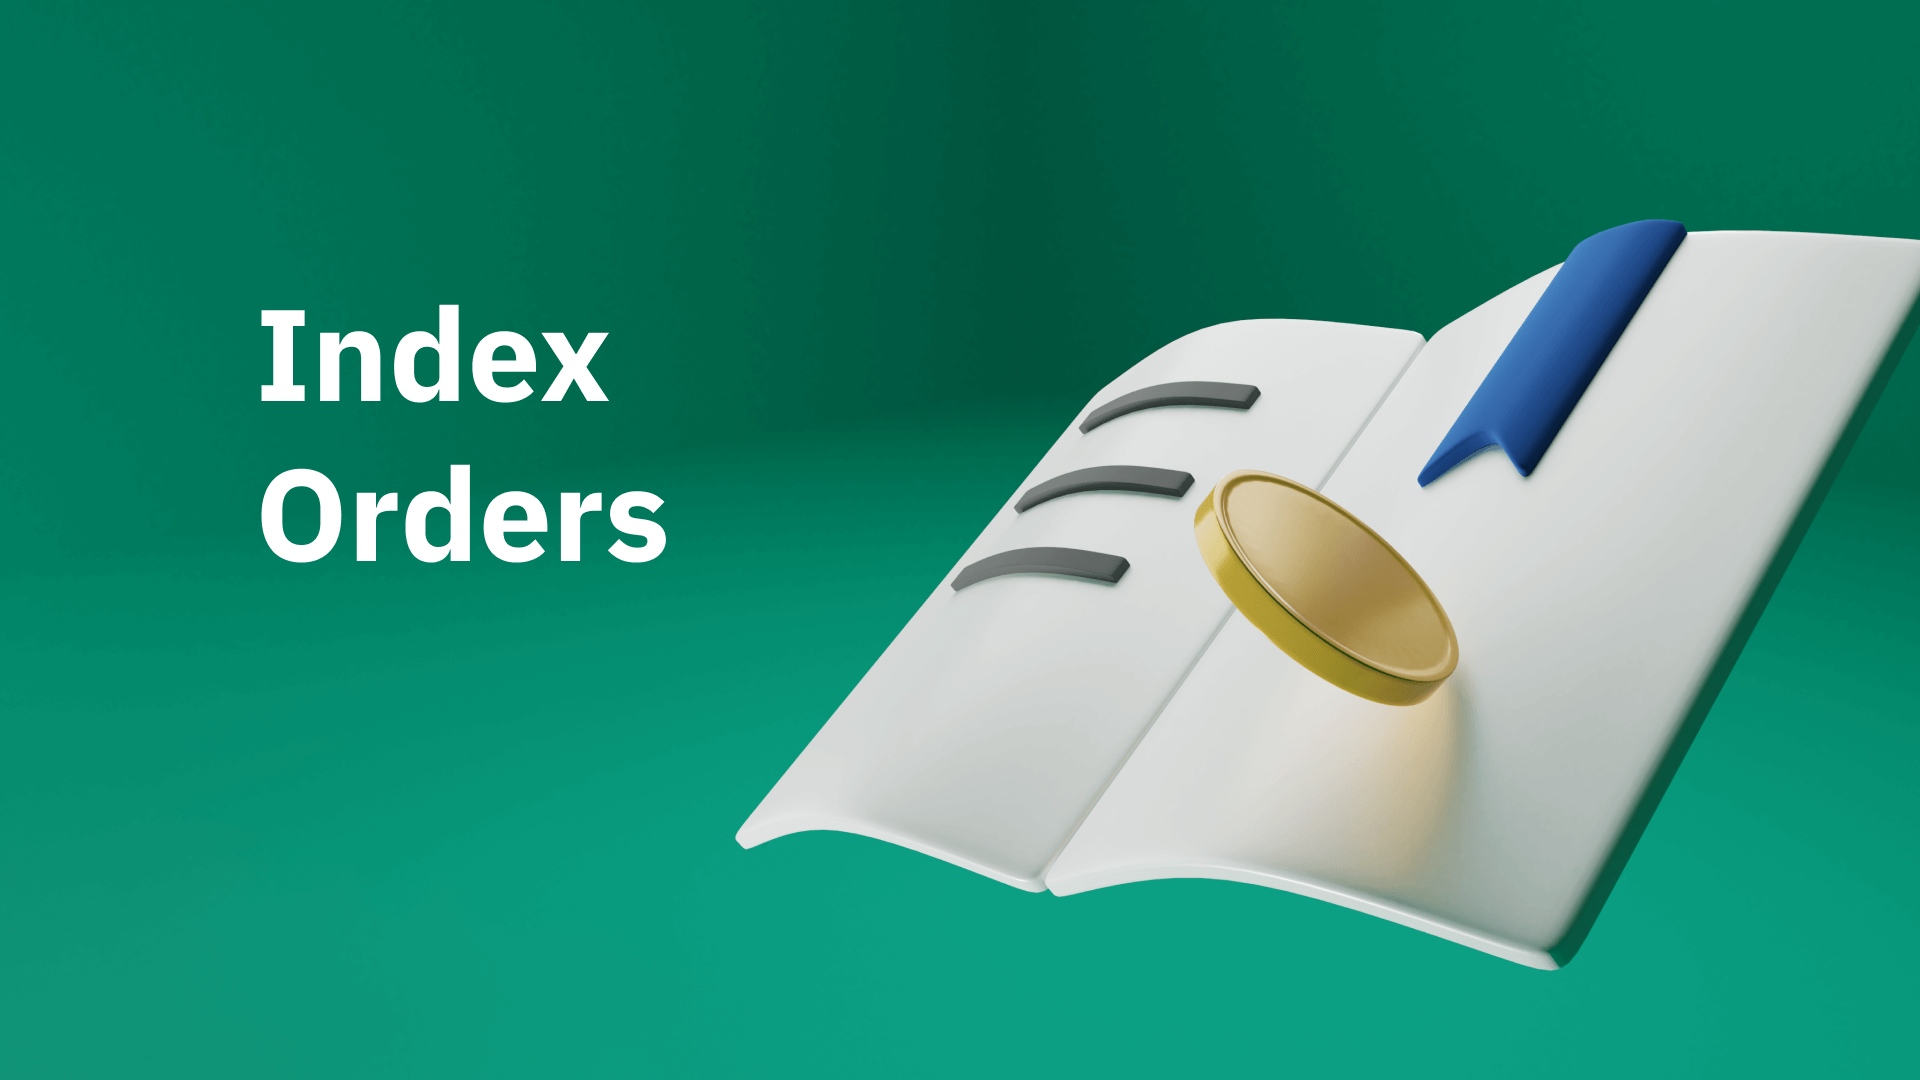 What is an Index Order?